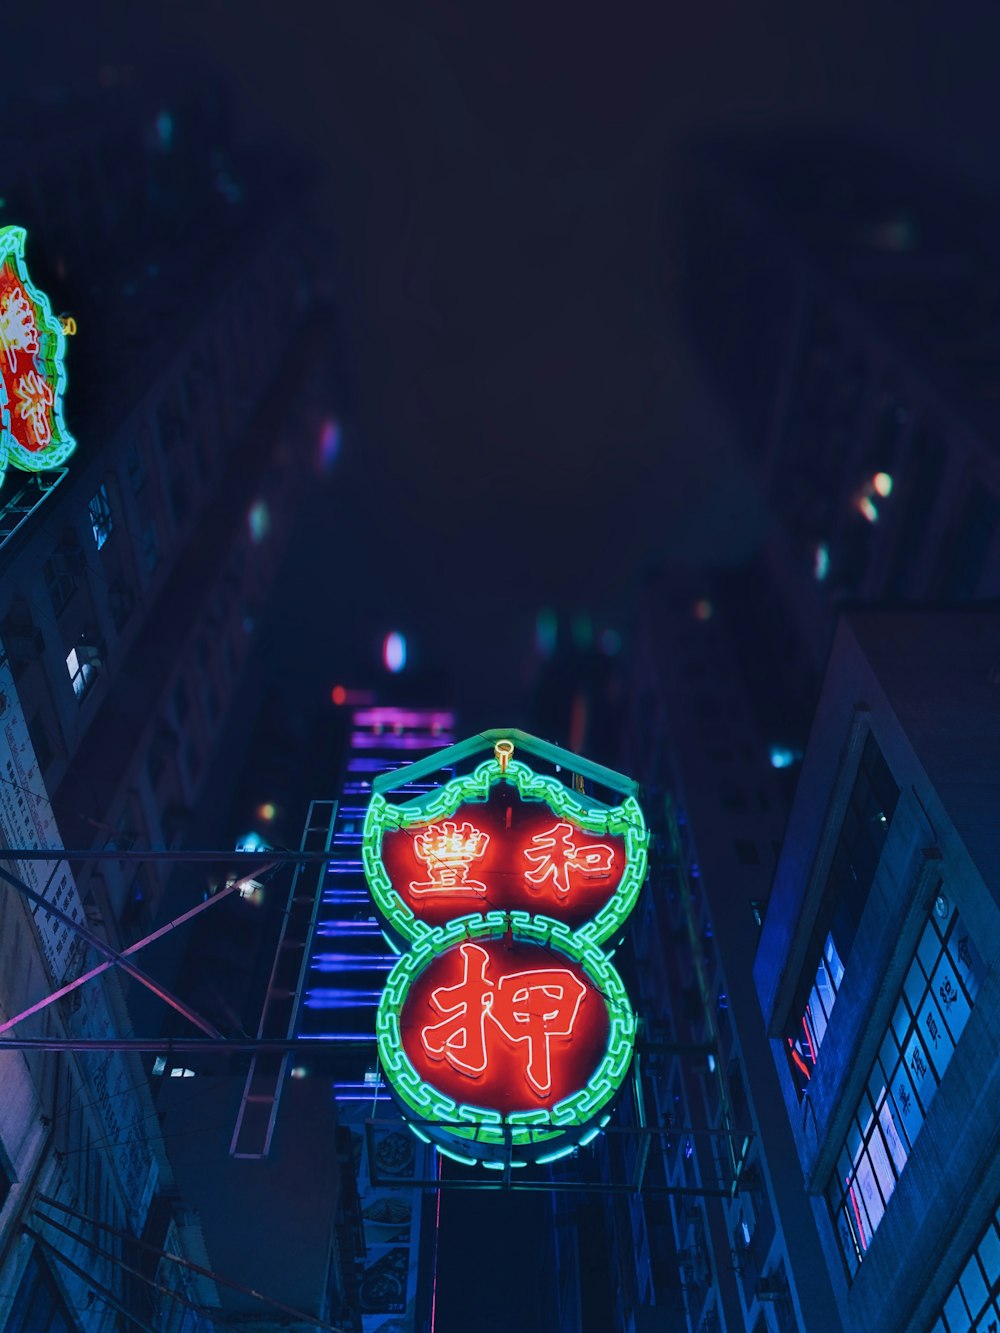 red and green led signage